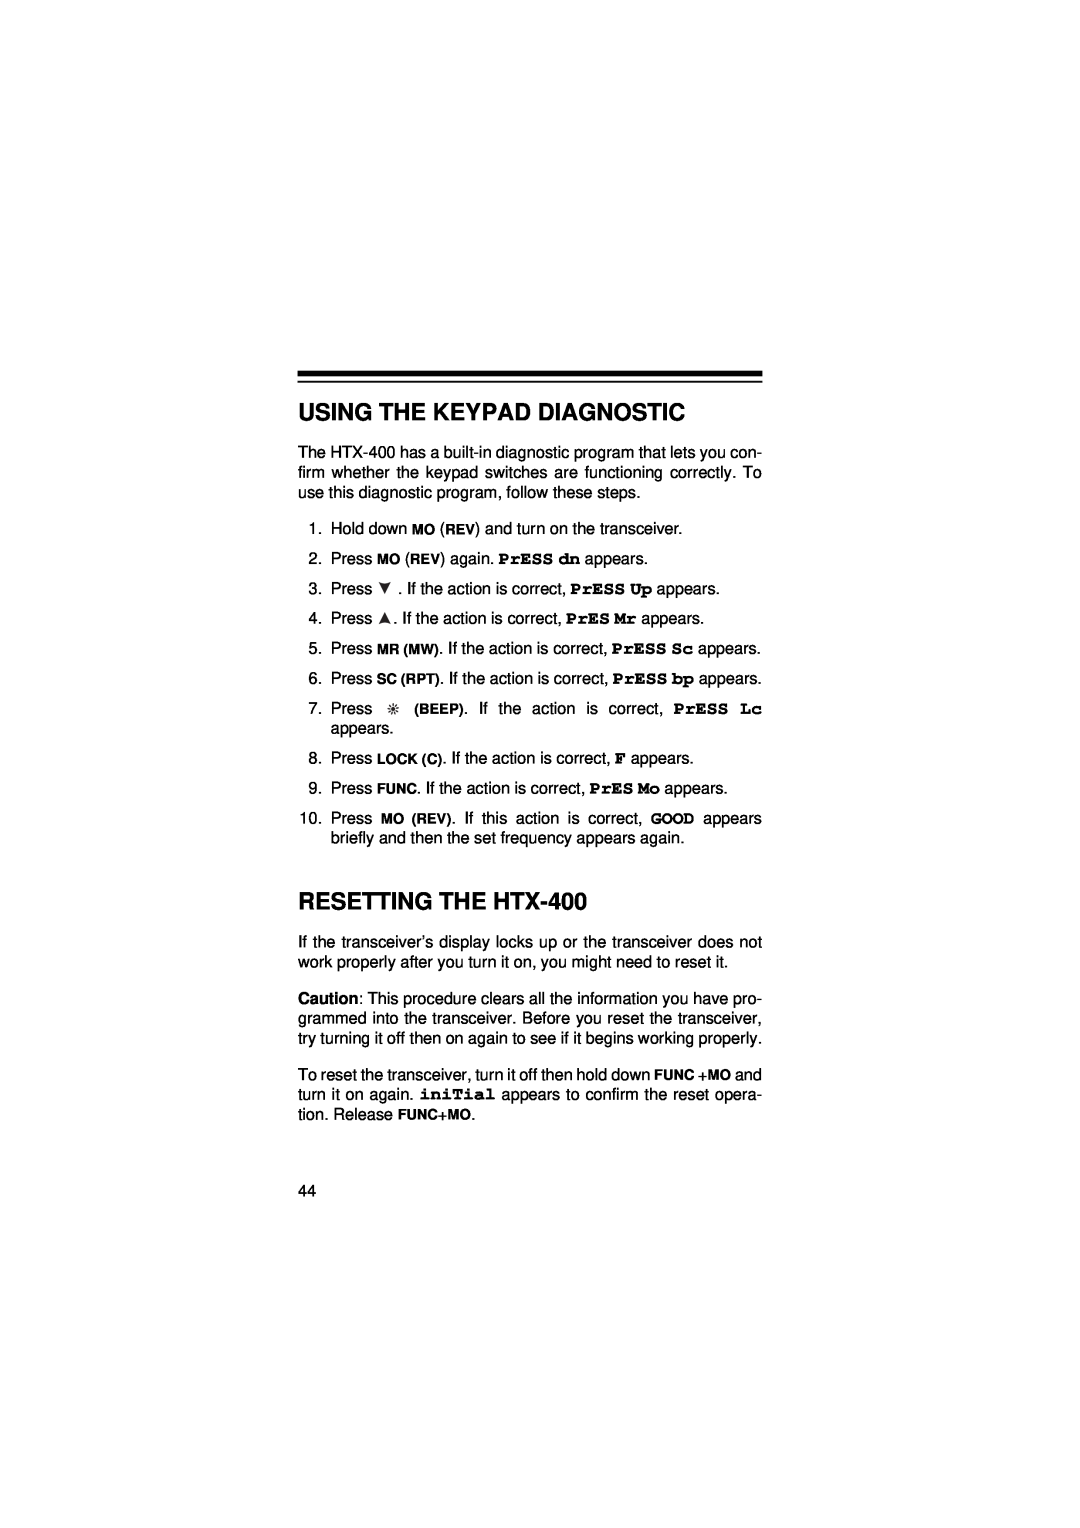 Radio Shack owner manual Using The Keypad Diagnostic, RESETTING THE HTX-400 